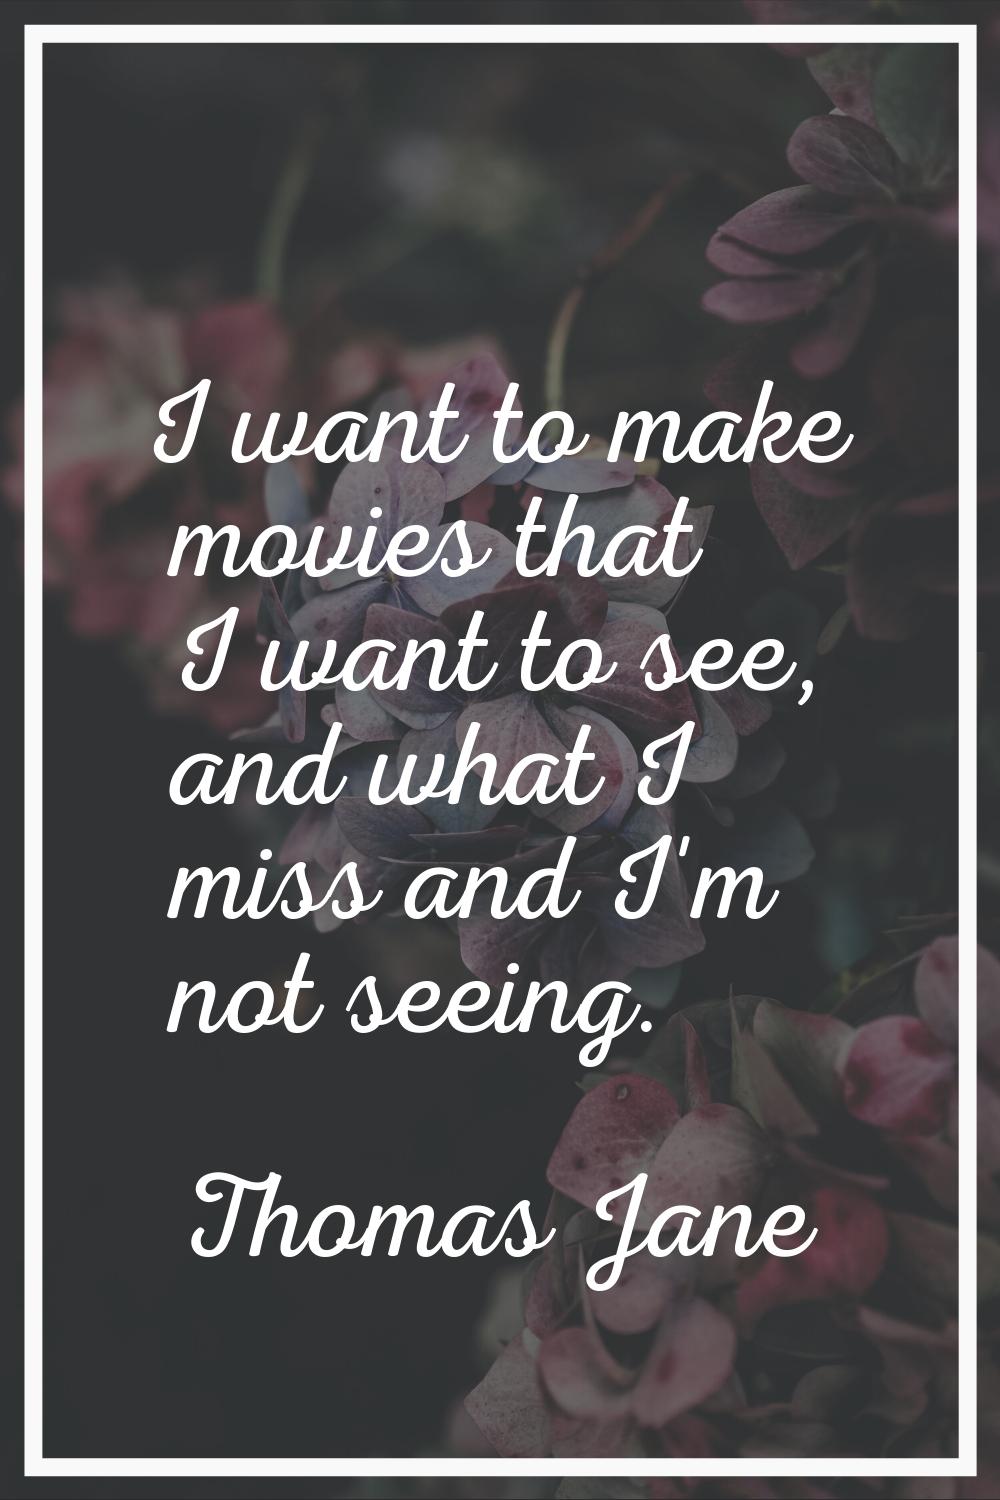 I want to make movies that I want to see, and what I miss and I'm not seeing.